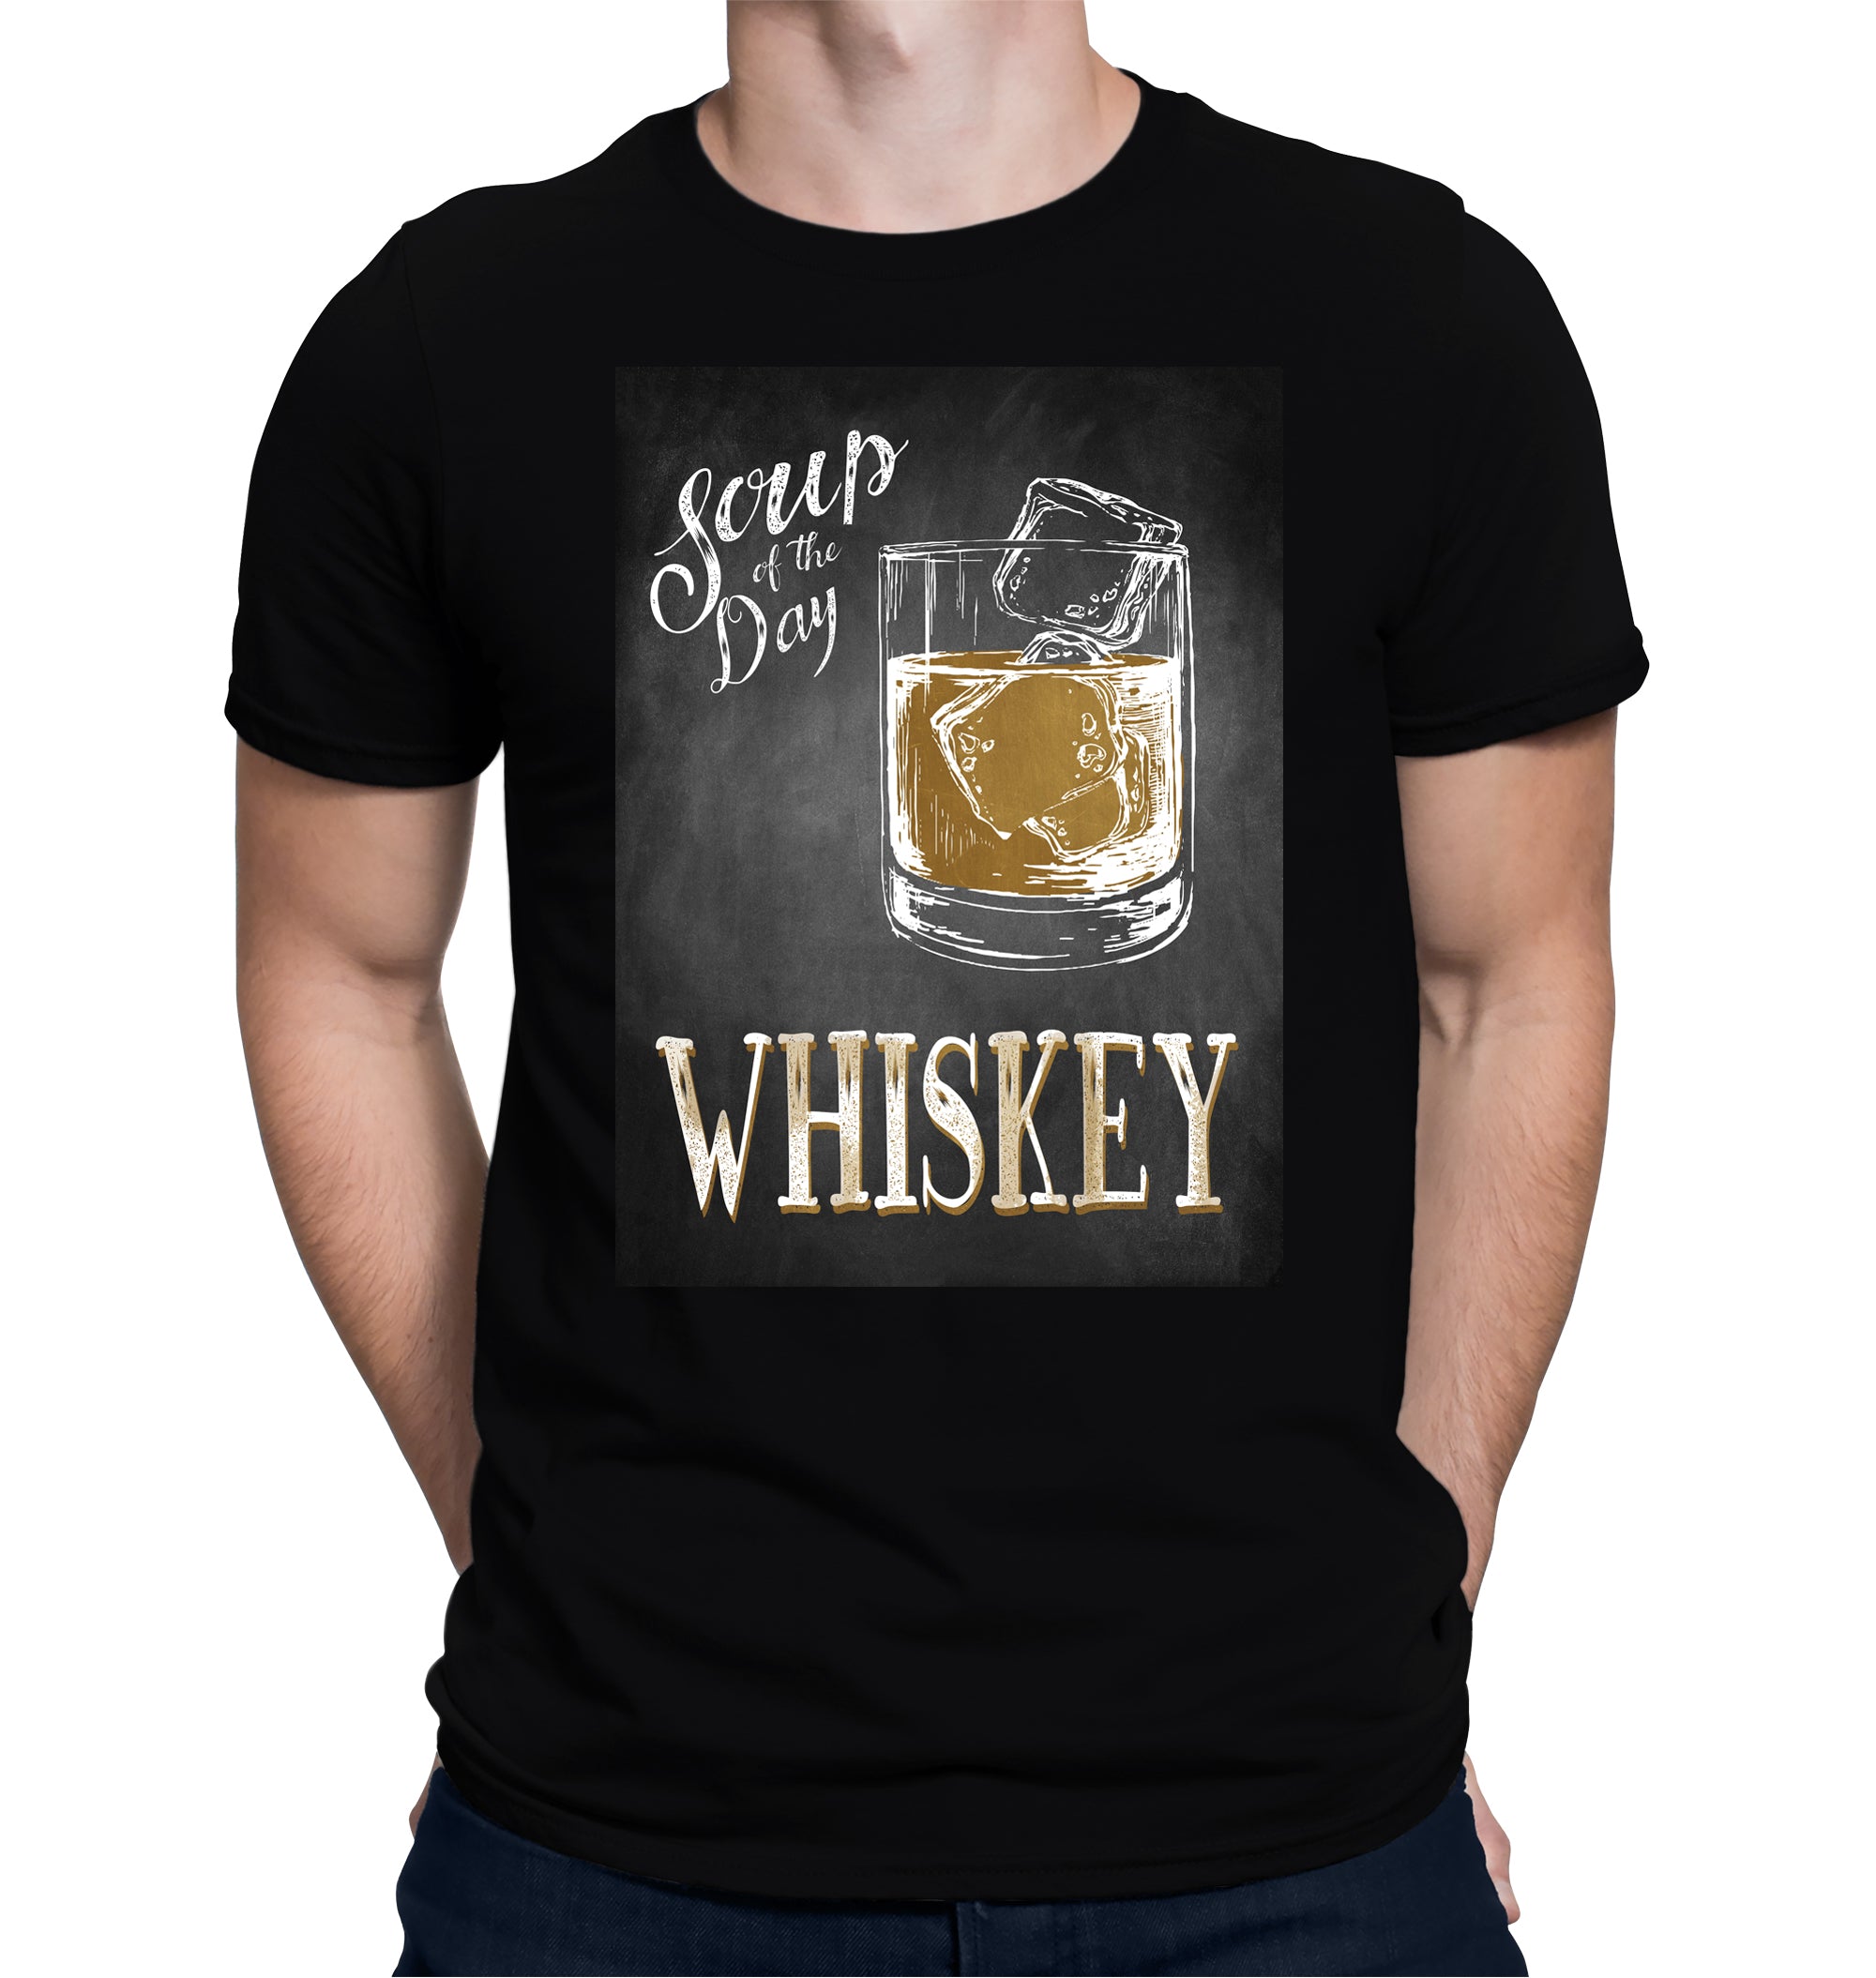 Soup of the Day, Whiskey T-Shirt on Model